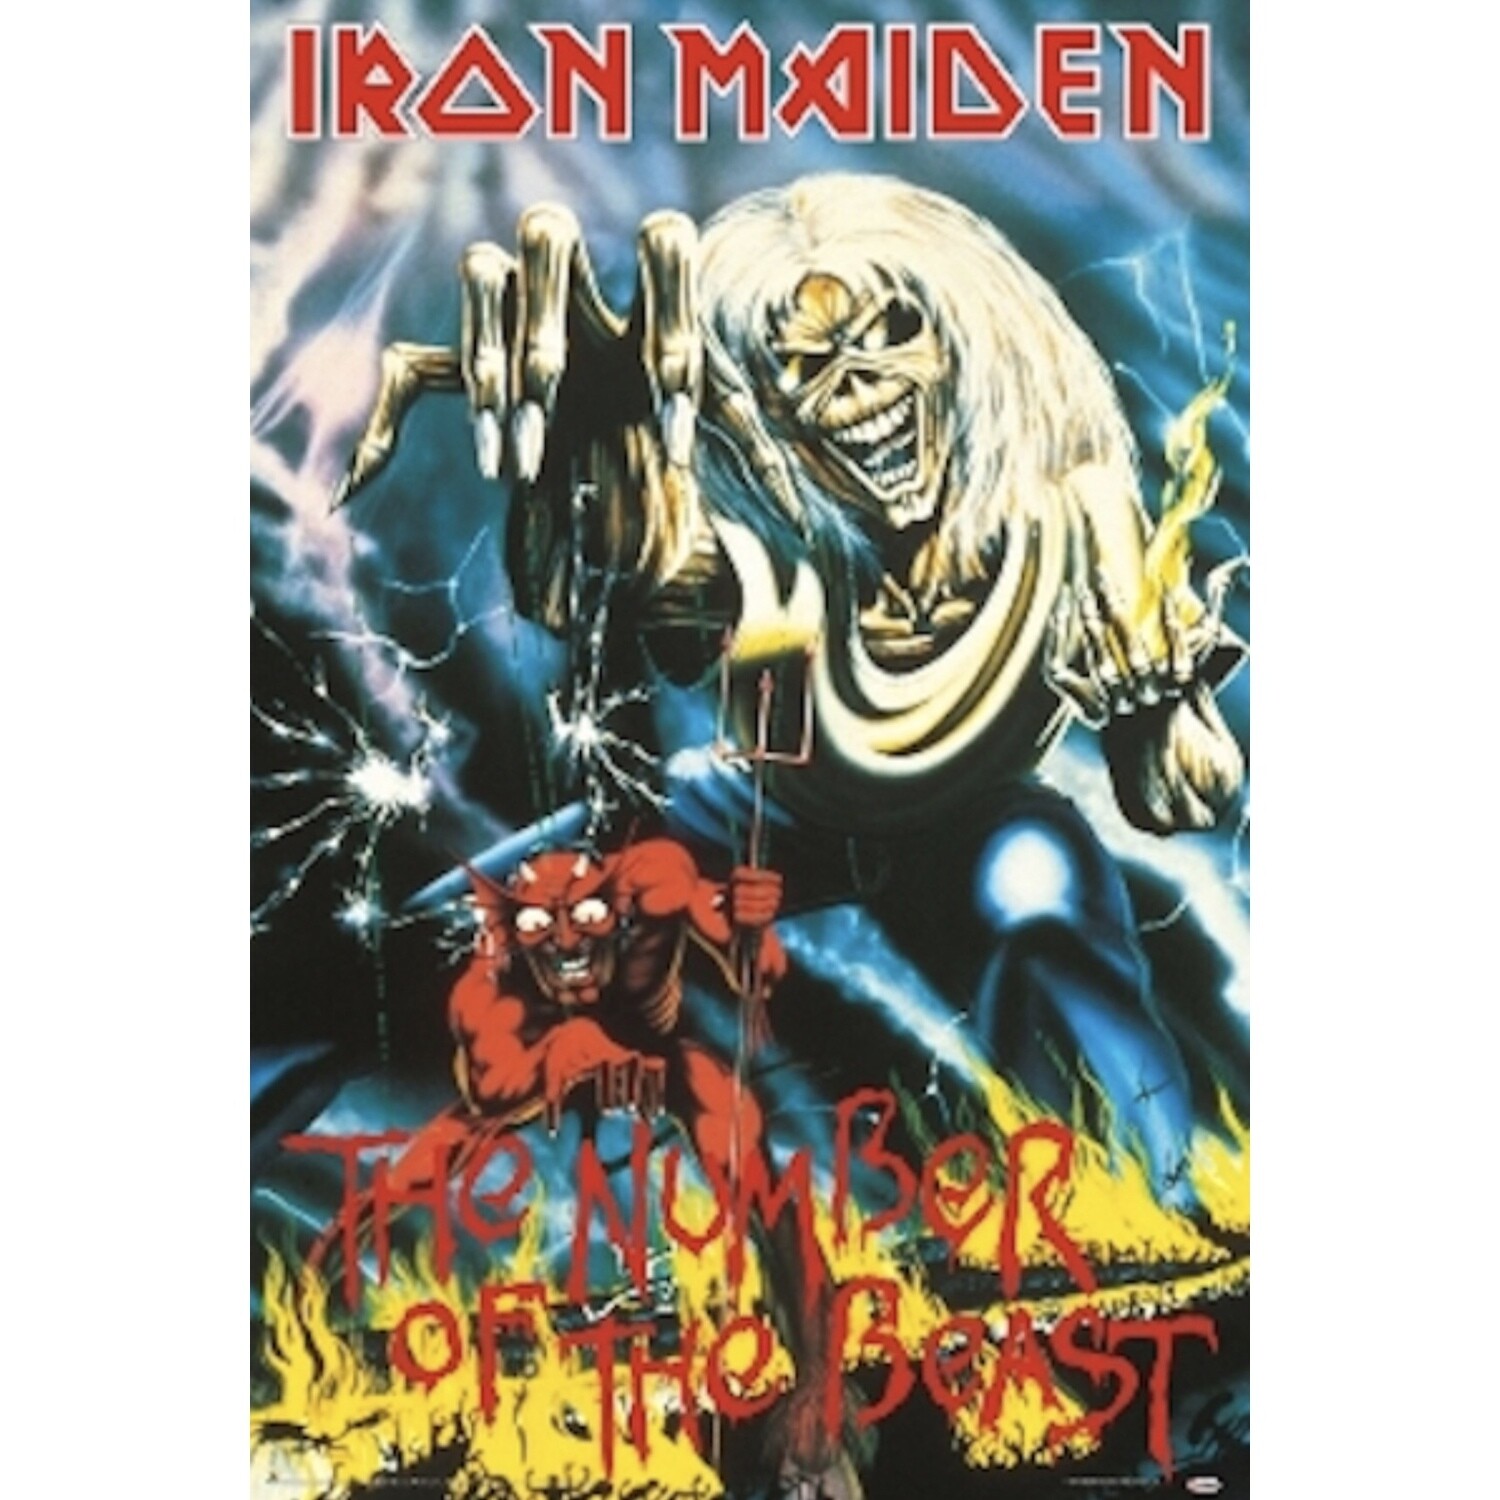 IRON MAIDEN NUMBER OF THE BEAST POSTER